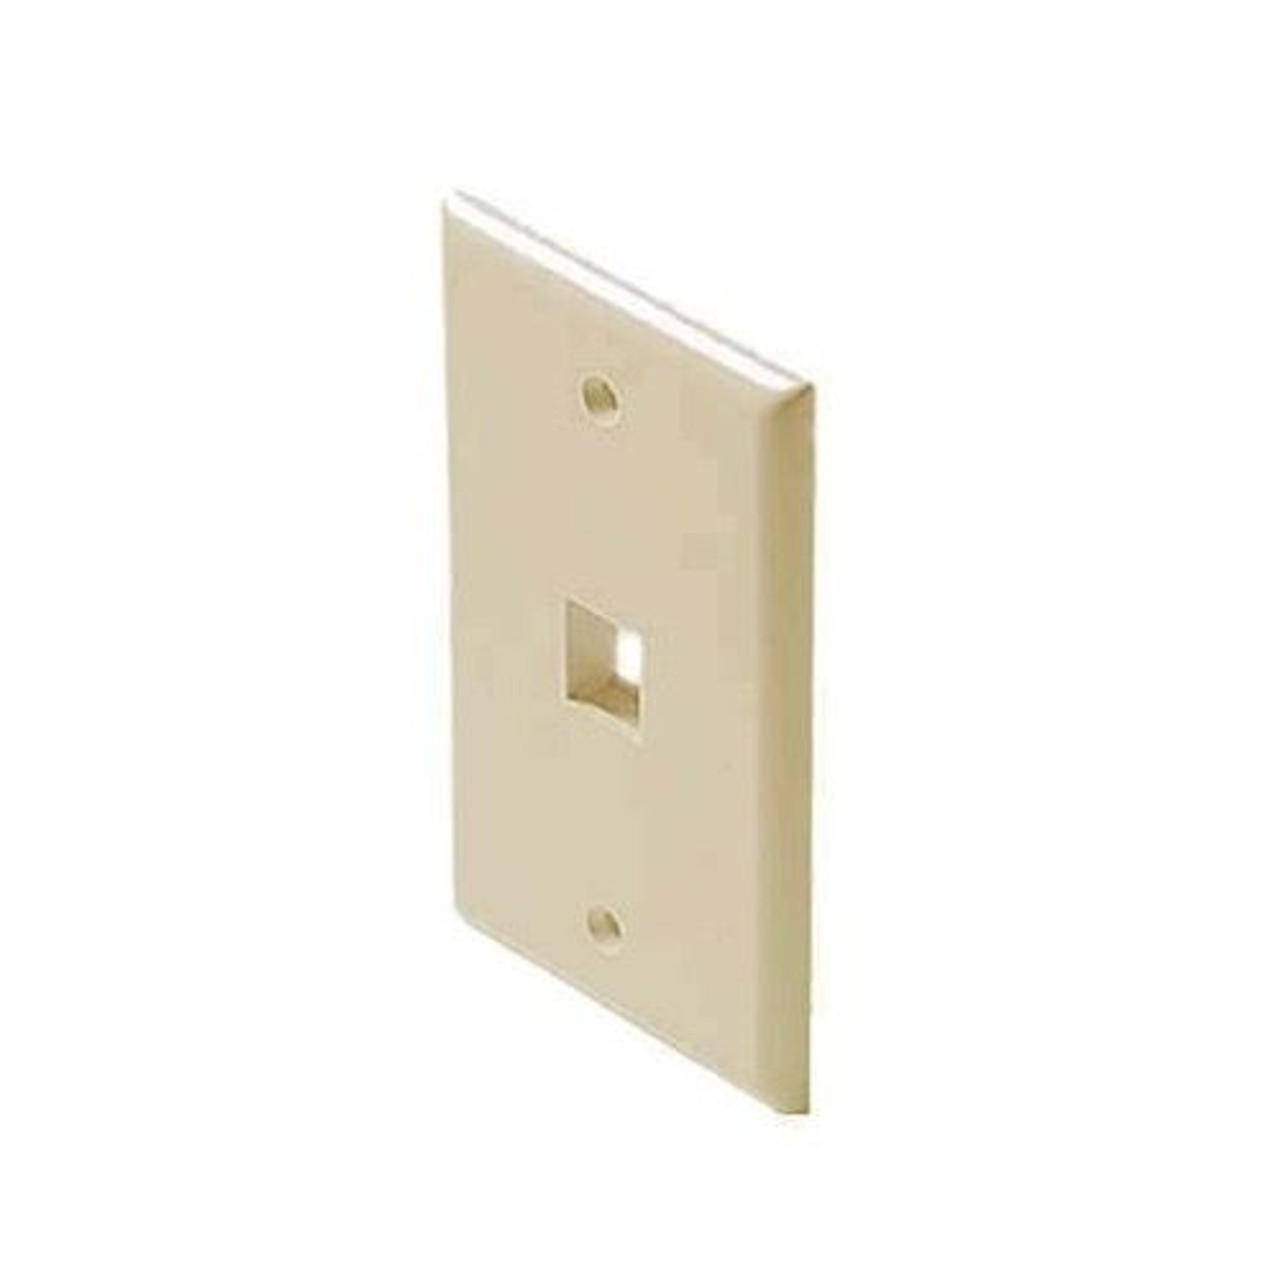 Eagle 1 Port Keystone Wall Plate Ivory Single One Cavity QuickPort Flush Mount, Easy Audio Video Data Junction Component Snap-In Insert Connection